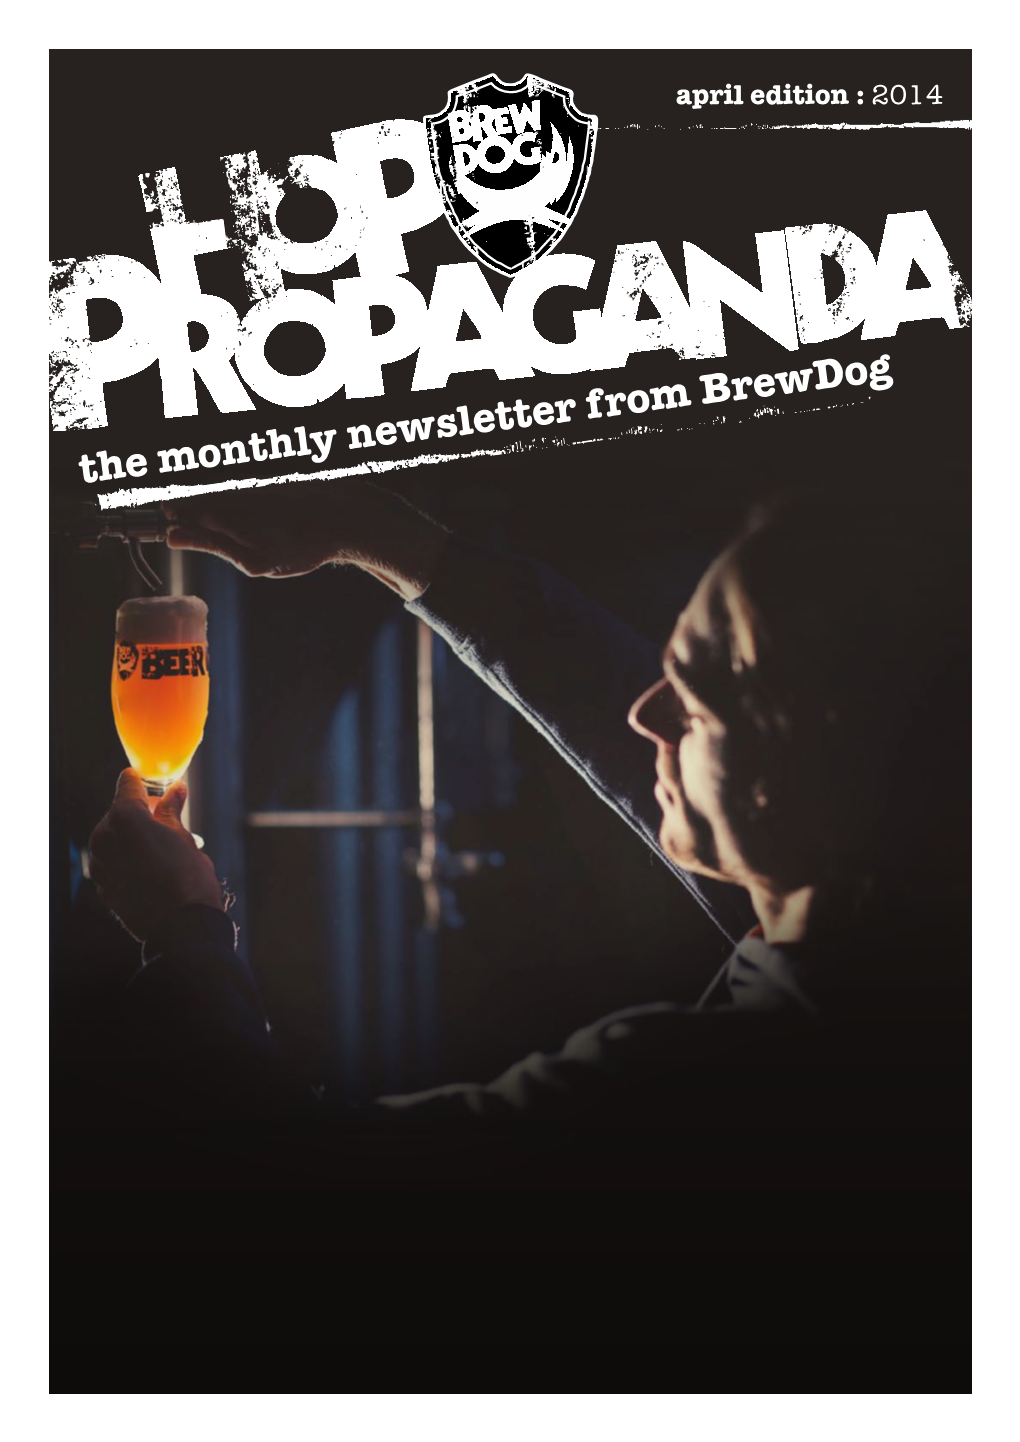 The Monthly Newsletter from Brewdog #Punkagm2014 It’S Official, Our Equity for Punks #Punkagm2014 Has Been Confirmed for Saturday 21St June 2014!